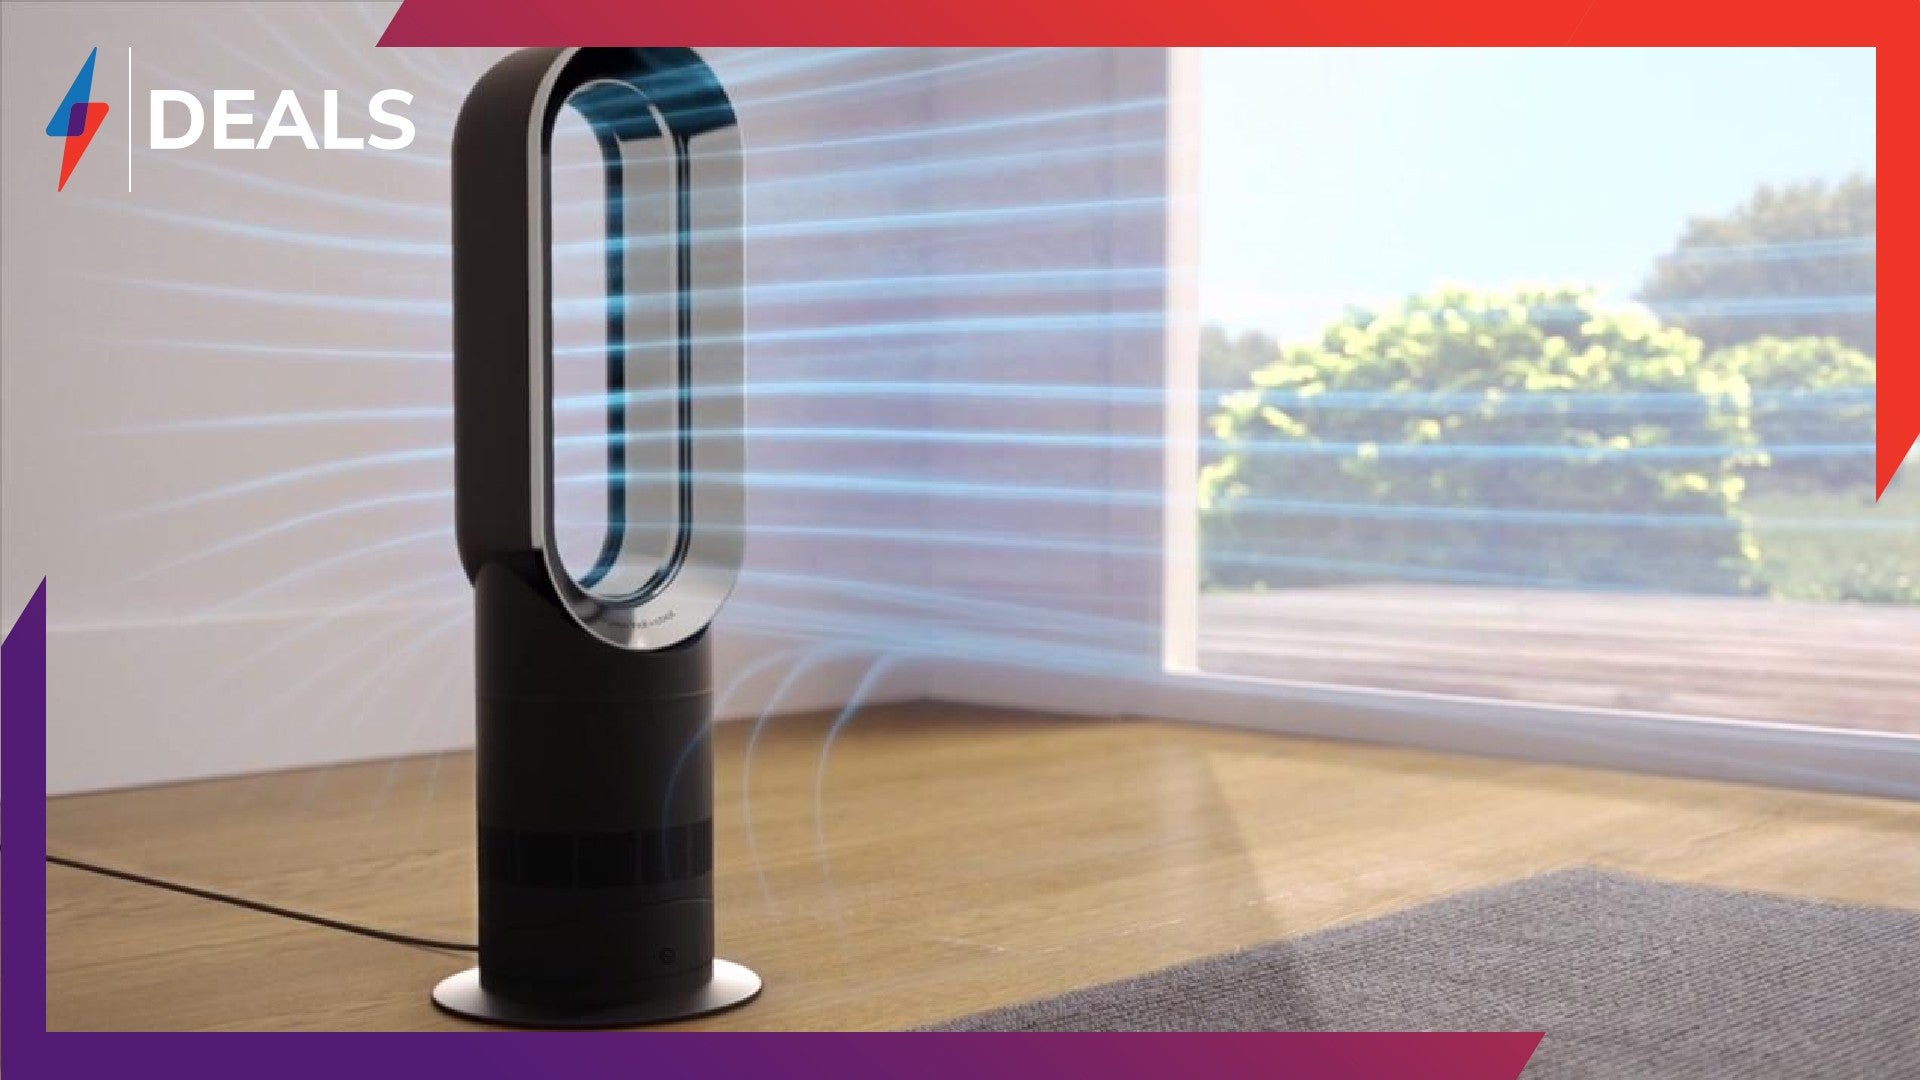 Best Fan Deals: Cool off with discounts on Evapolar and Dyson fans